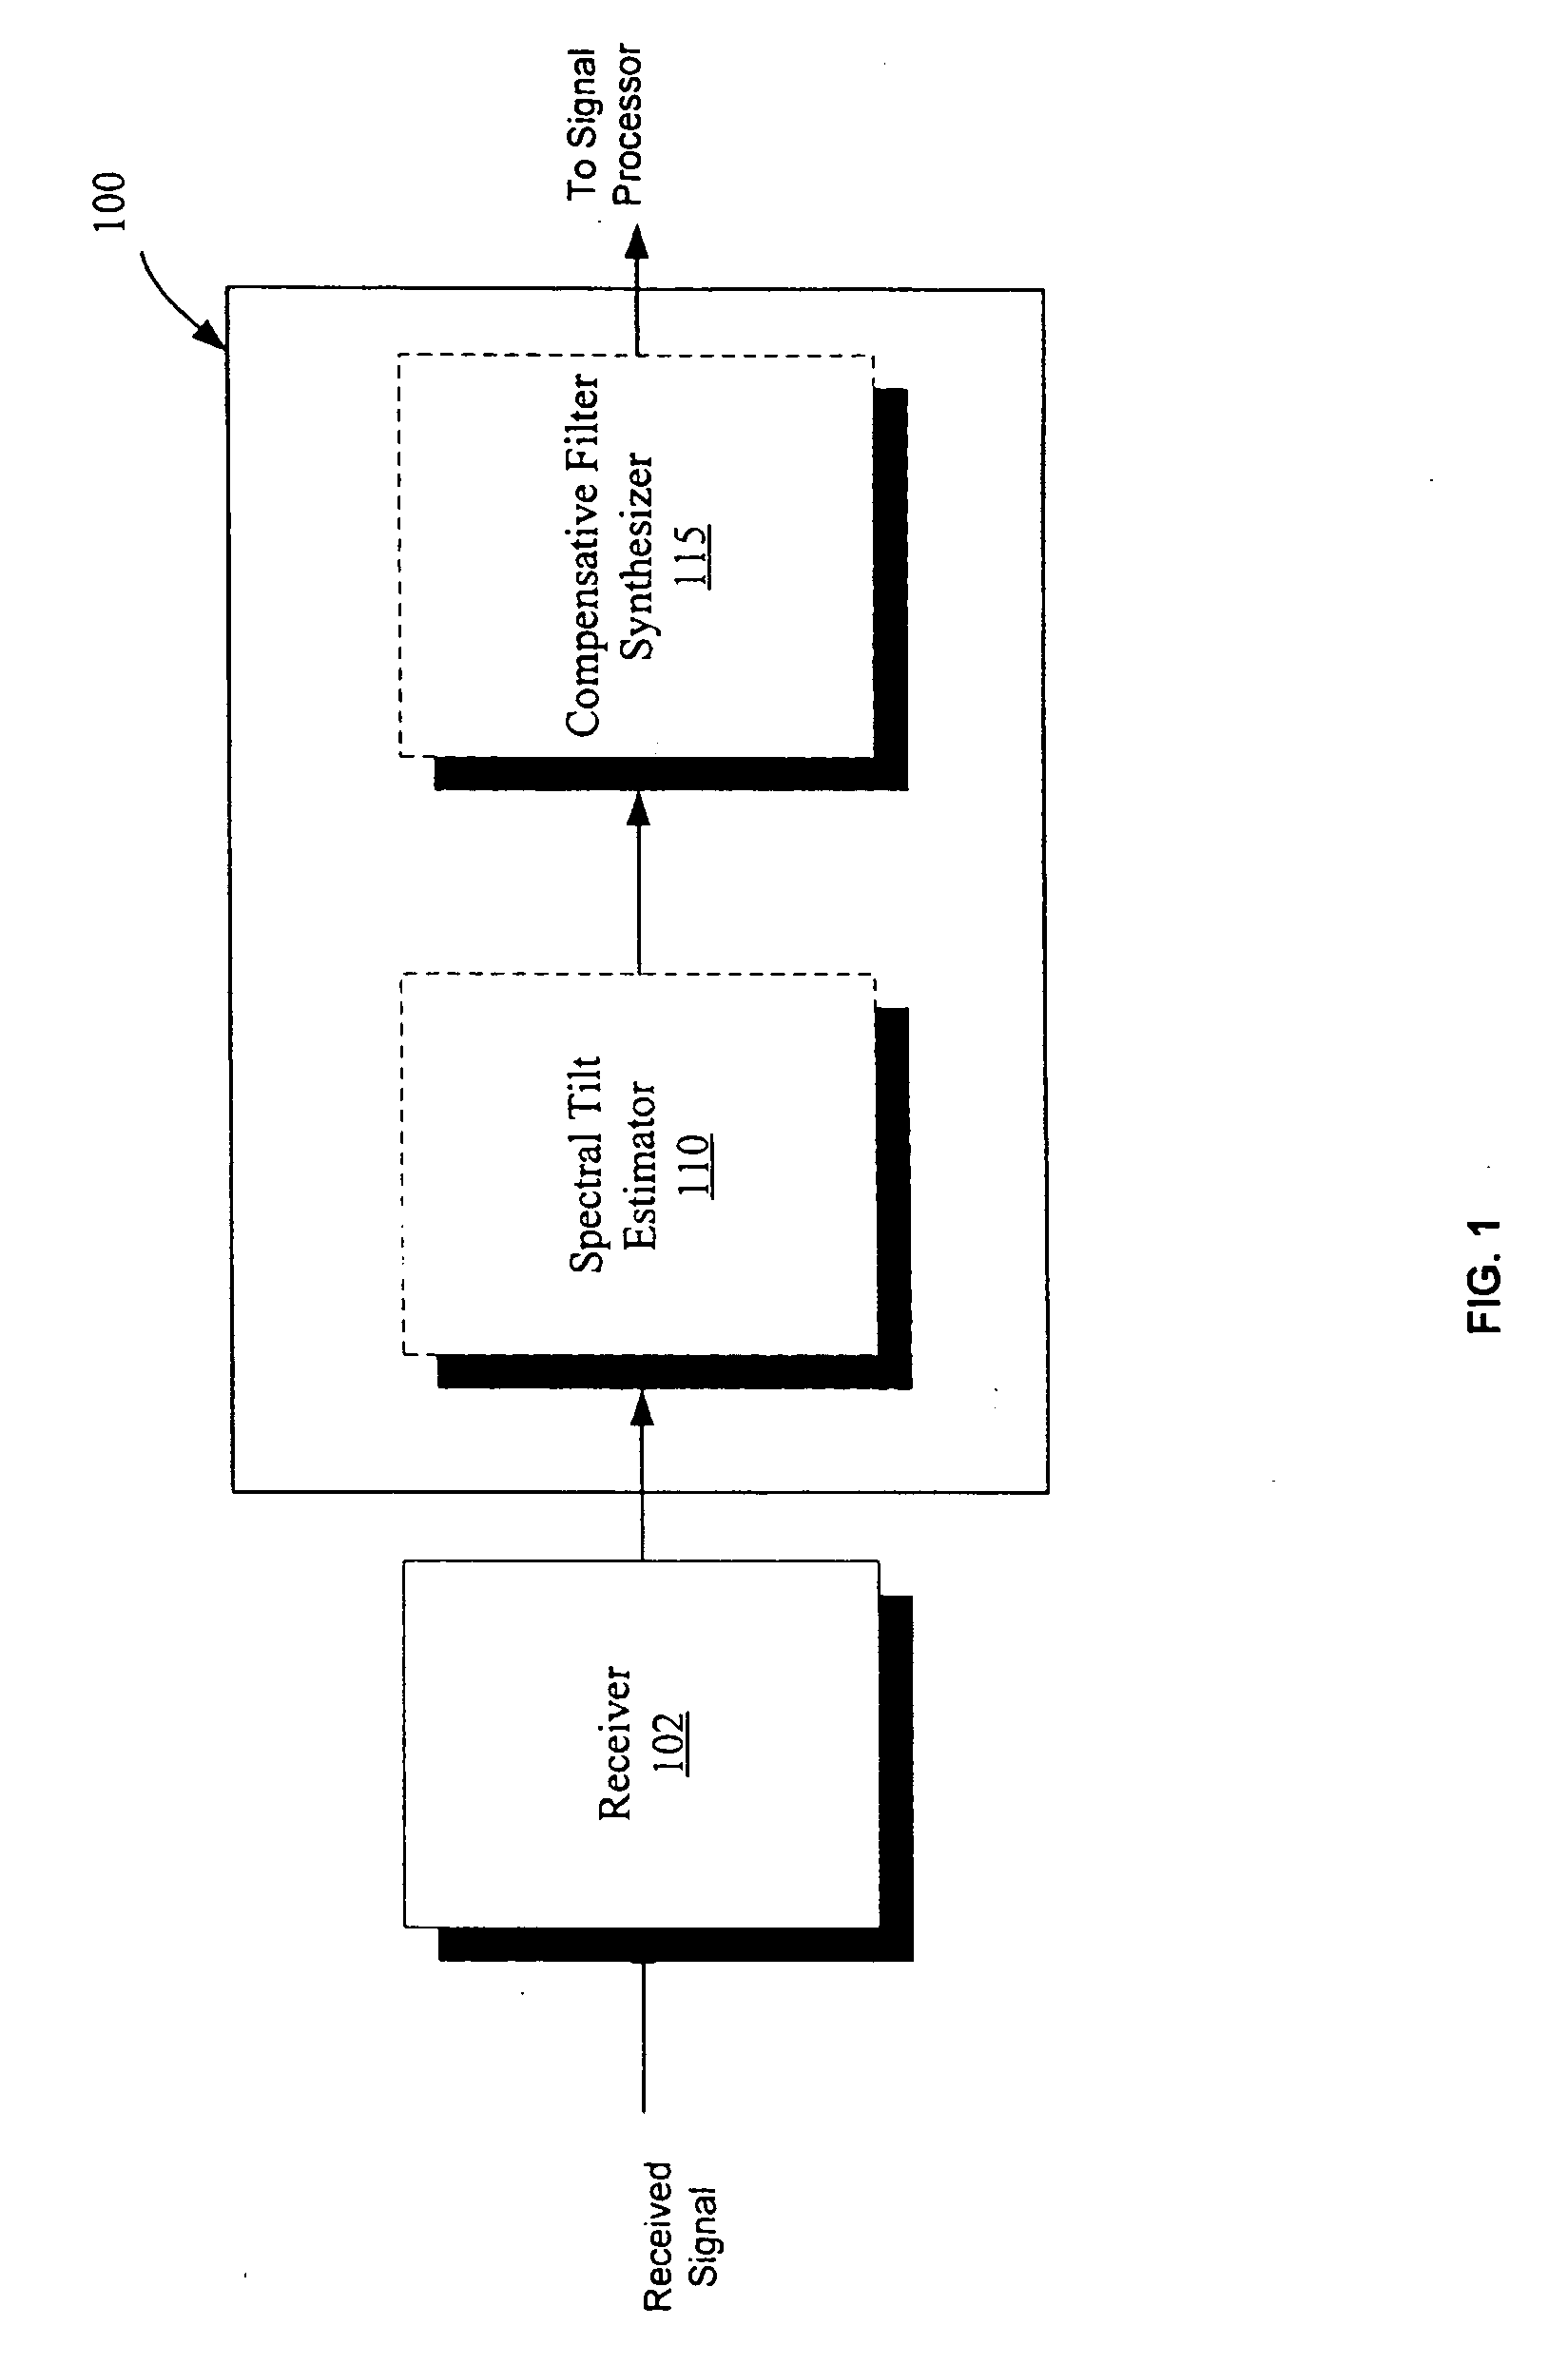 System and method of signal pre-conditioning with adaptive spectral tilt compensation for audio equalization